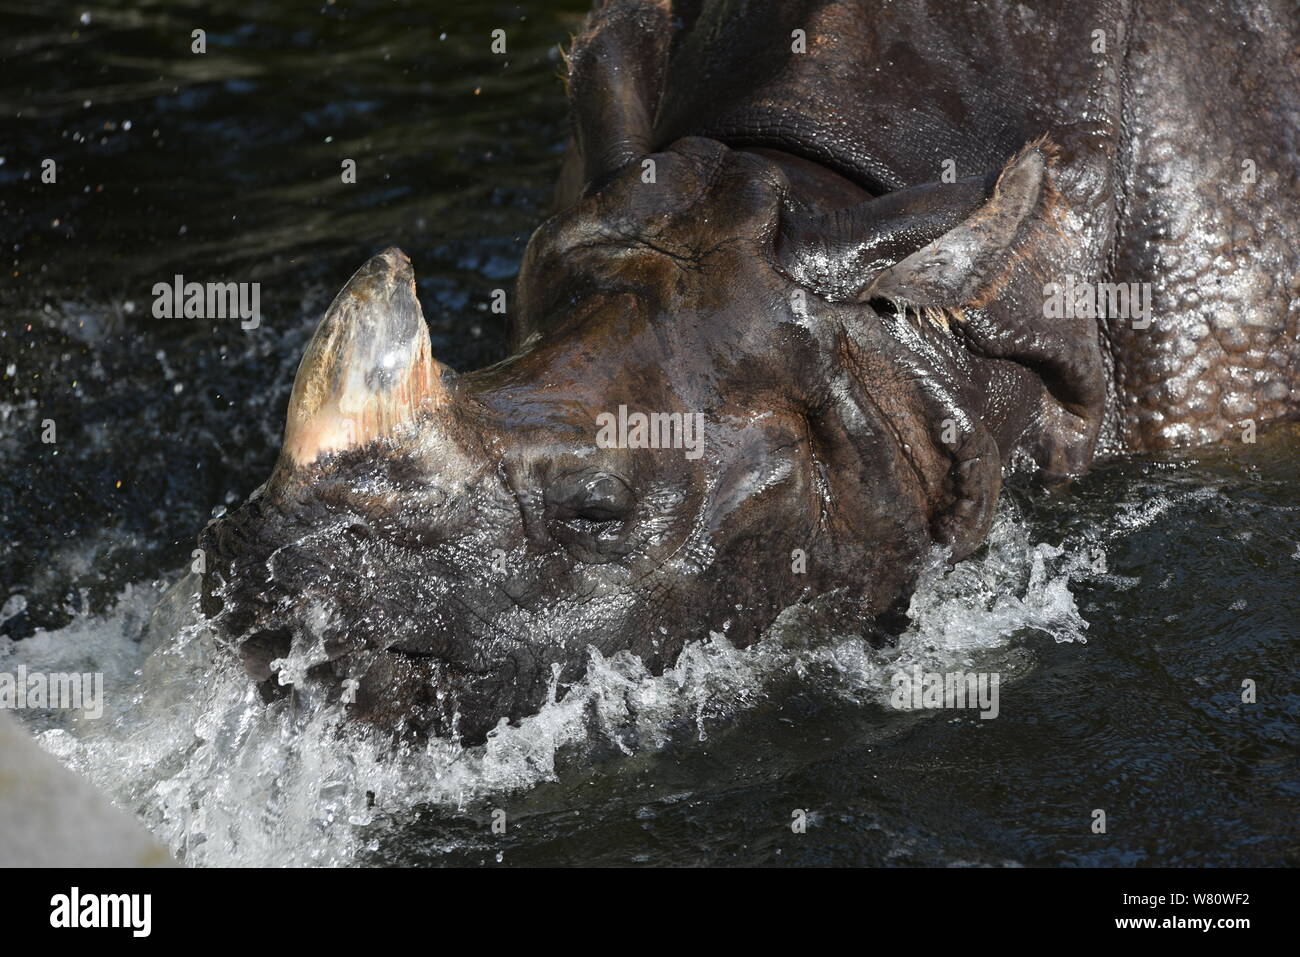 An Indian rhinoceros cools off in water at their enclosure in Madrid zoo, where high temperatures reached 37º degrees Celsius during the afternoon hours.Spanish's weather agency AEMET said that temperatures are expected to exceed 41° celsius degrees tomorrow Wednesday in southern Spain. Yellow heat warnings have been issued in parts of the provinces of Malaga and Granada. Orange heat warnings, which meaning important risk, are in place for Murcia. Stock Photo